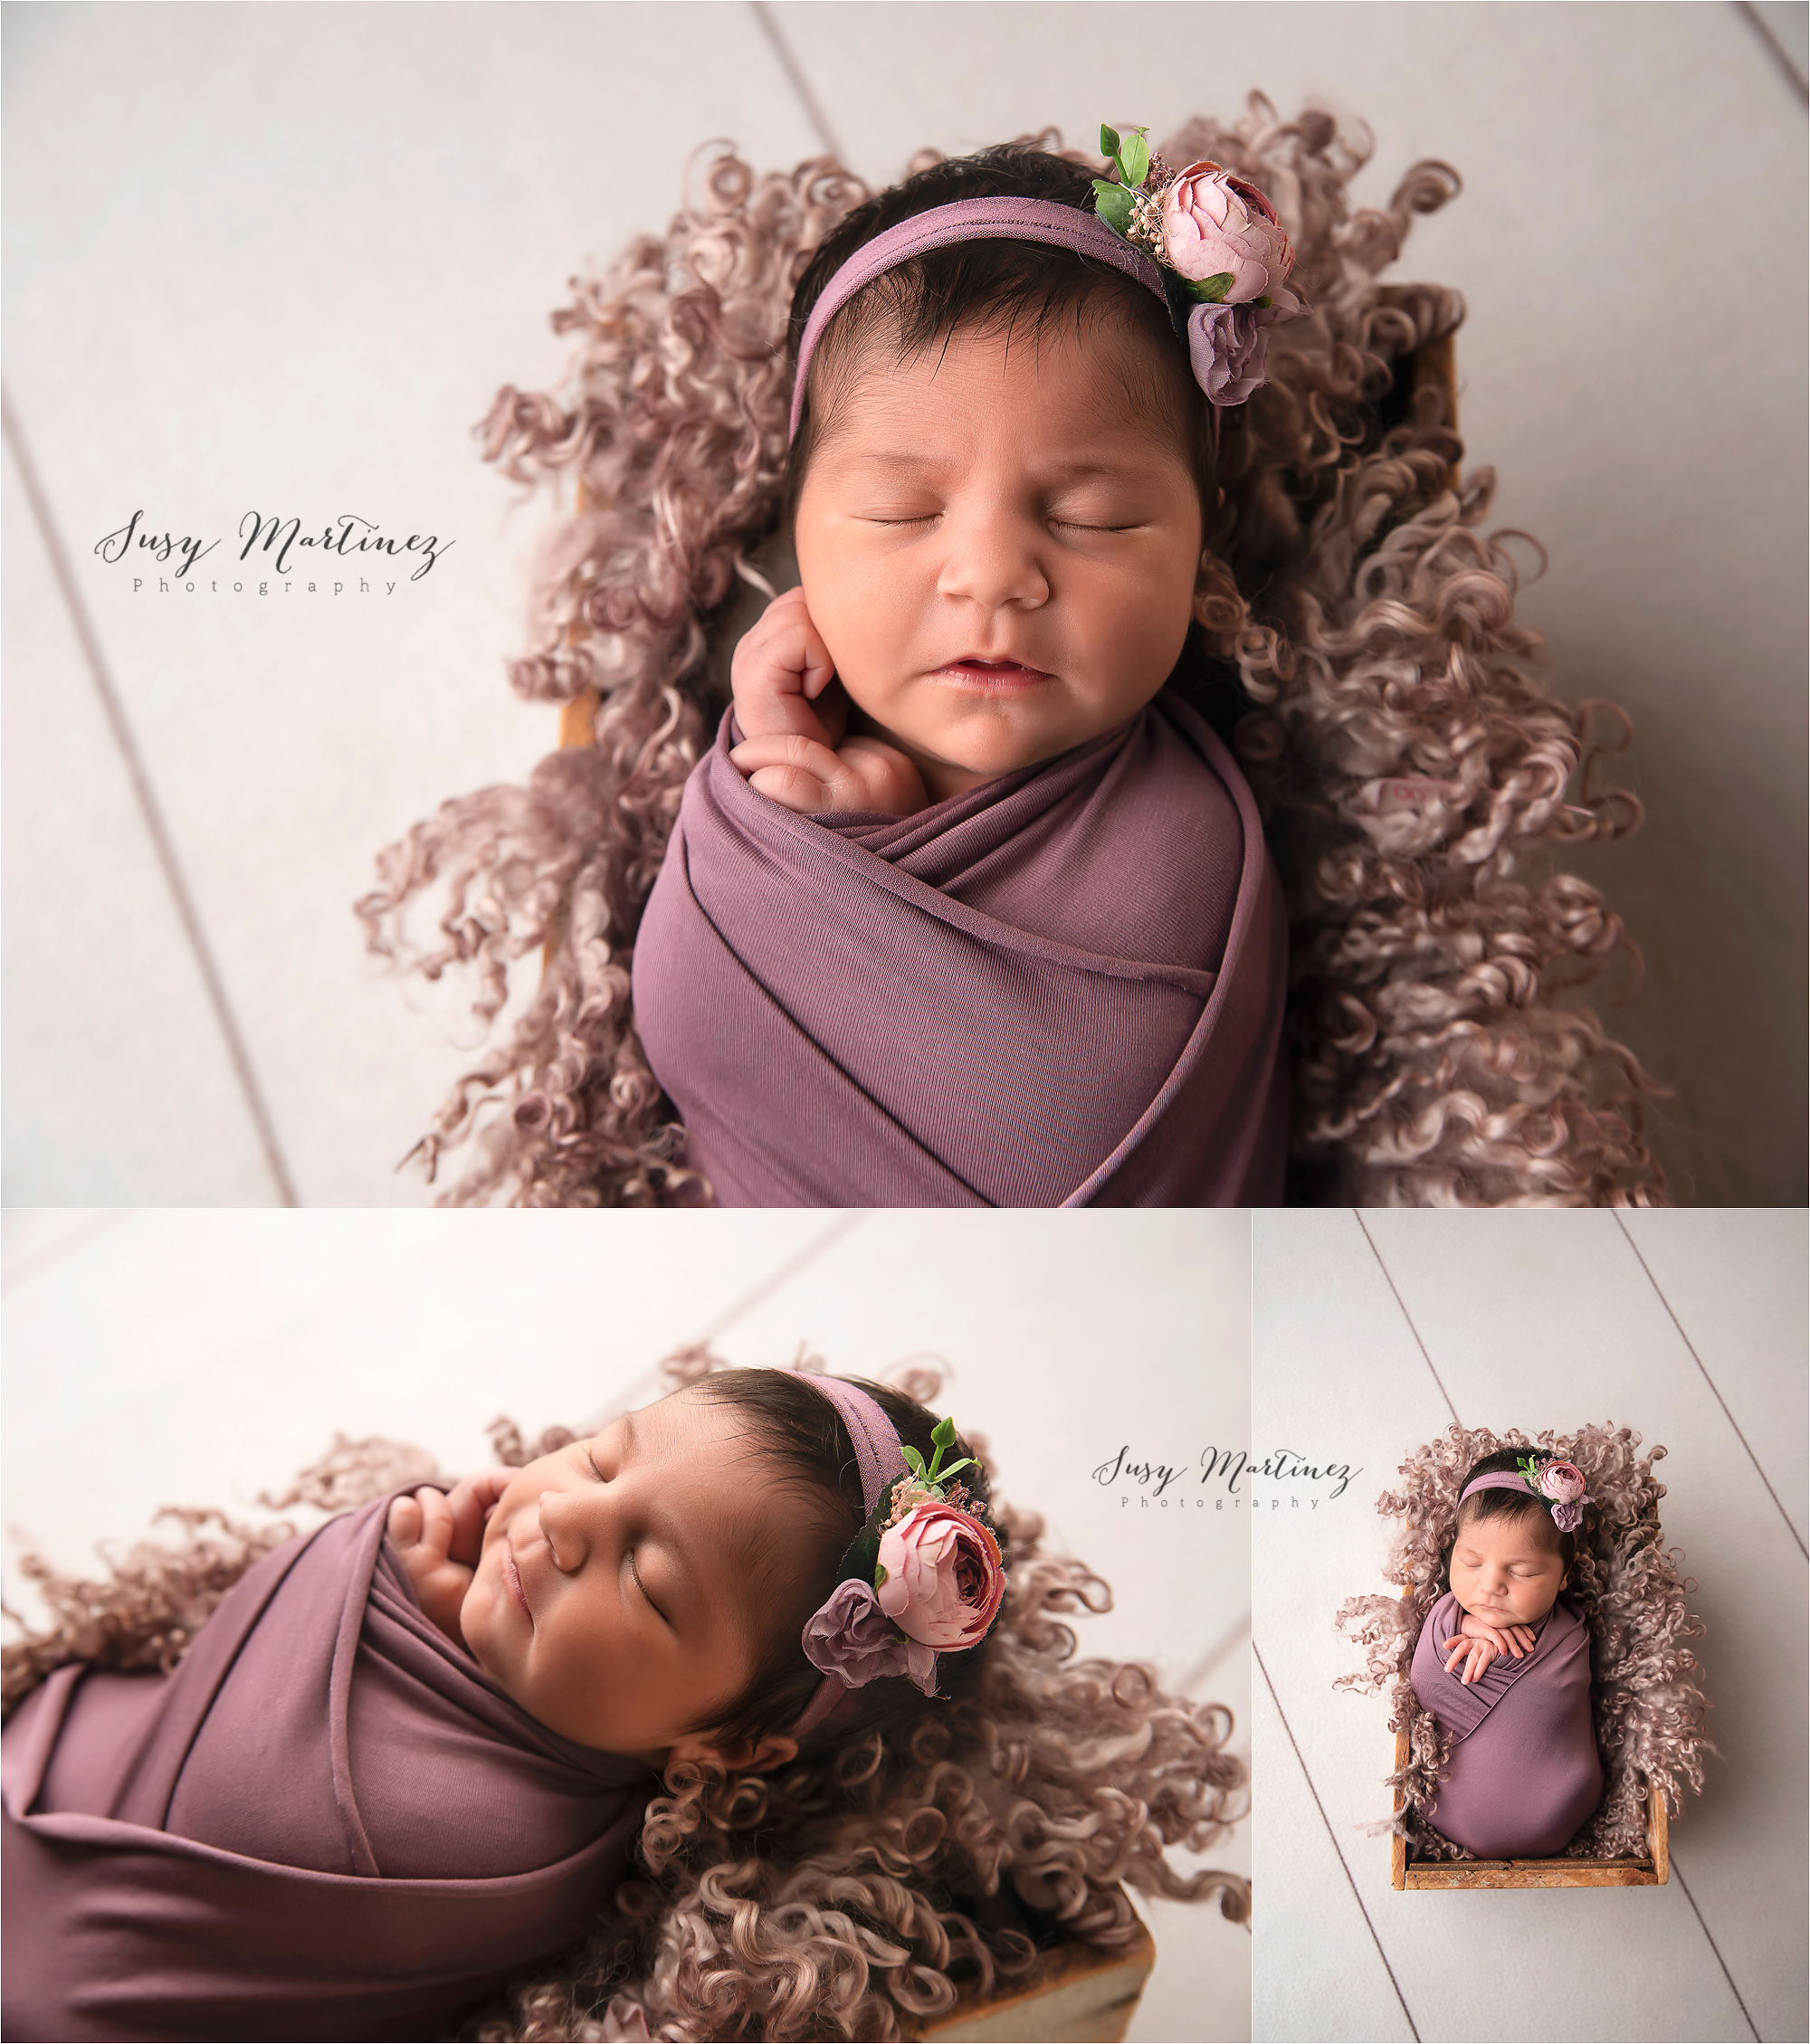 studio newborn session for baby girl photographed by Susy Martinez Photography